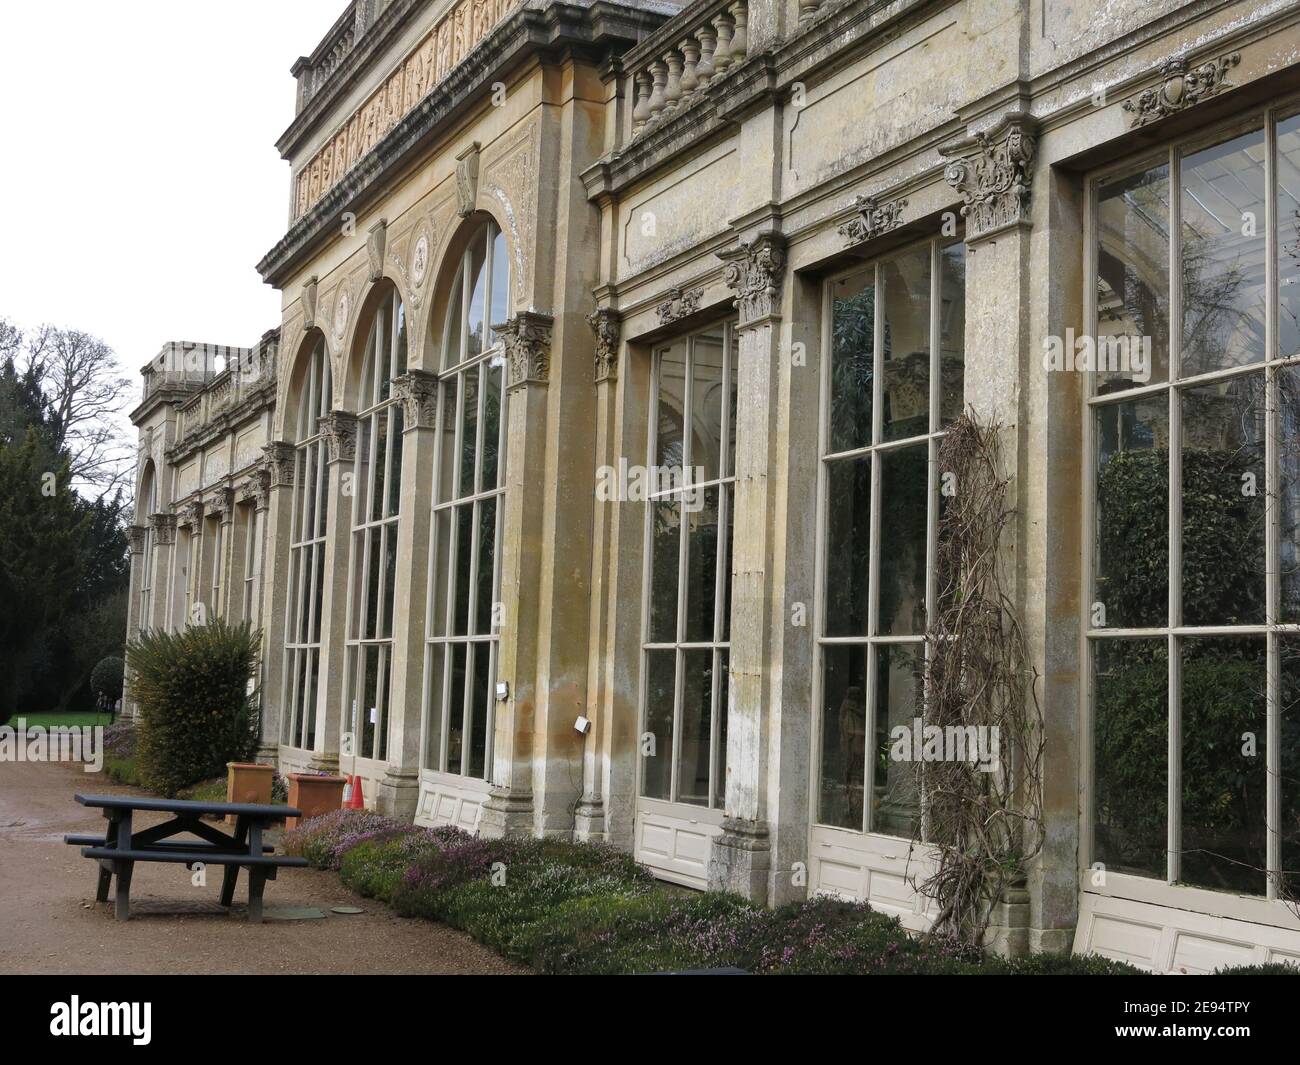 Built from limestone in 1872, an exterior view of the Orangerie or Palm House in the grounds of the Castle Ashby estate in Northamptonshire. Stock Photo